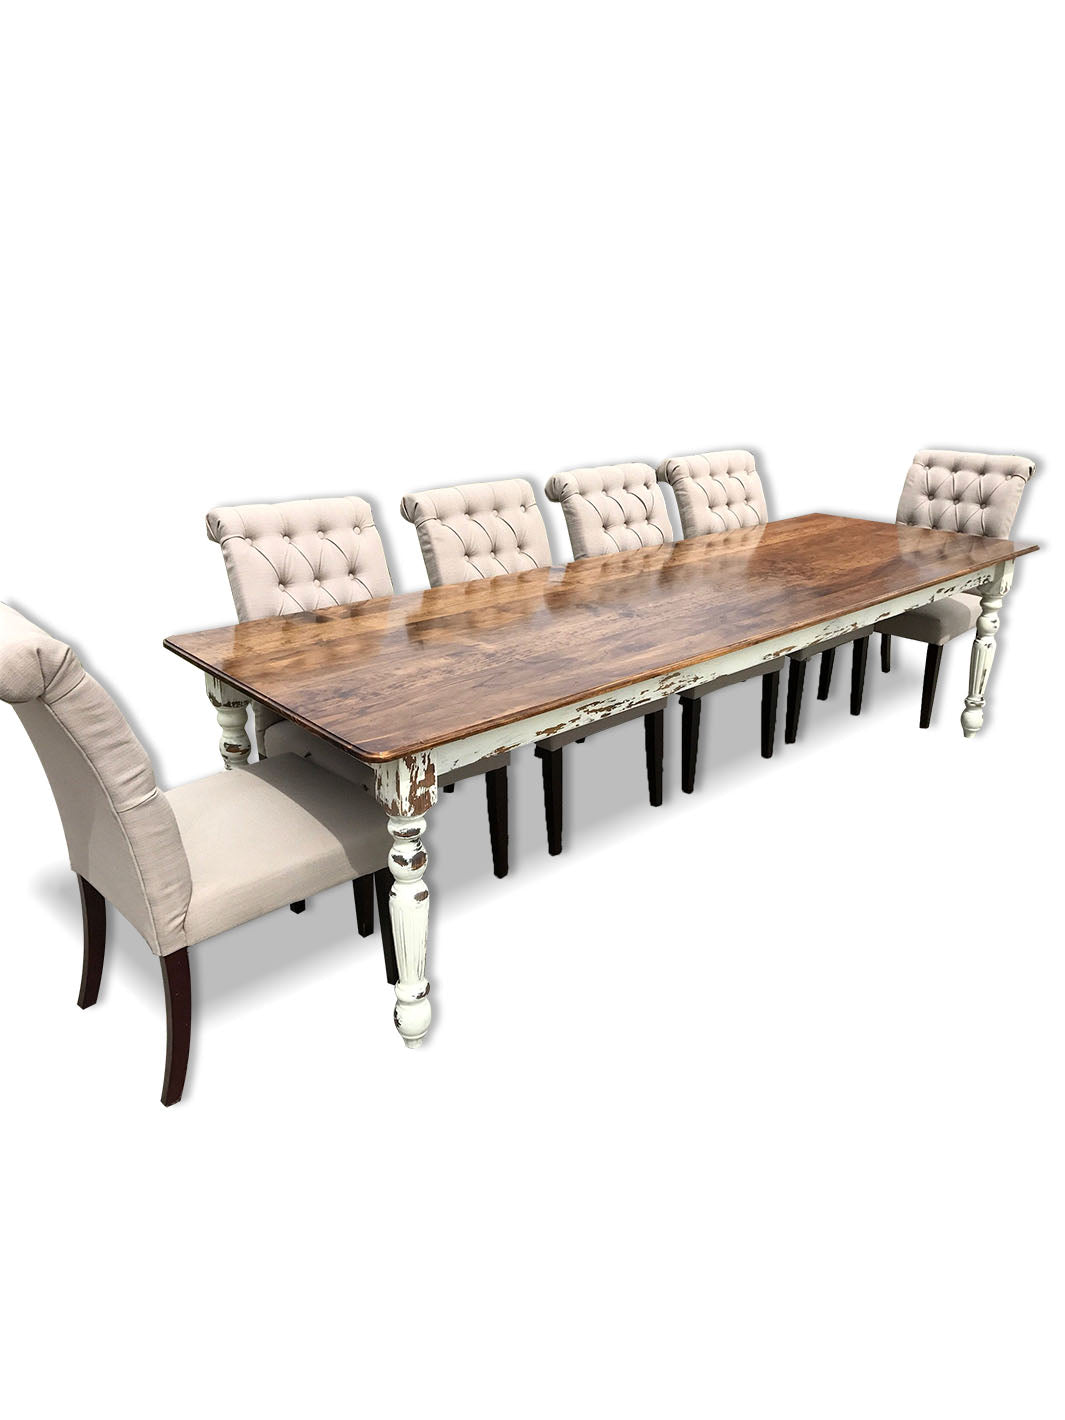 Farmhouse Dining Table with White Distressed Legs and Stained Pine Top Earthly Comfort Dining Tables 513